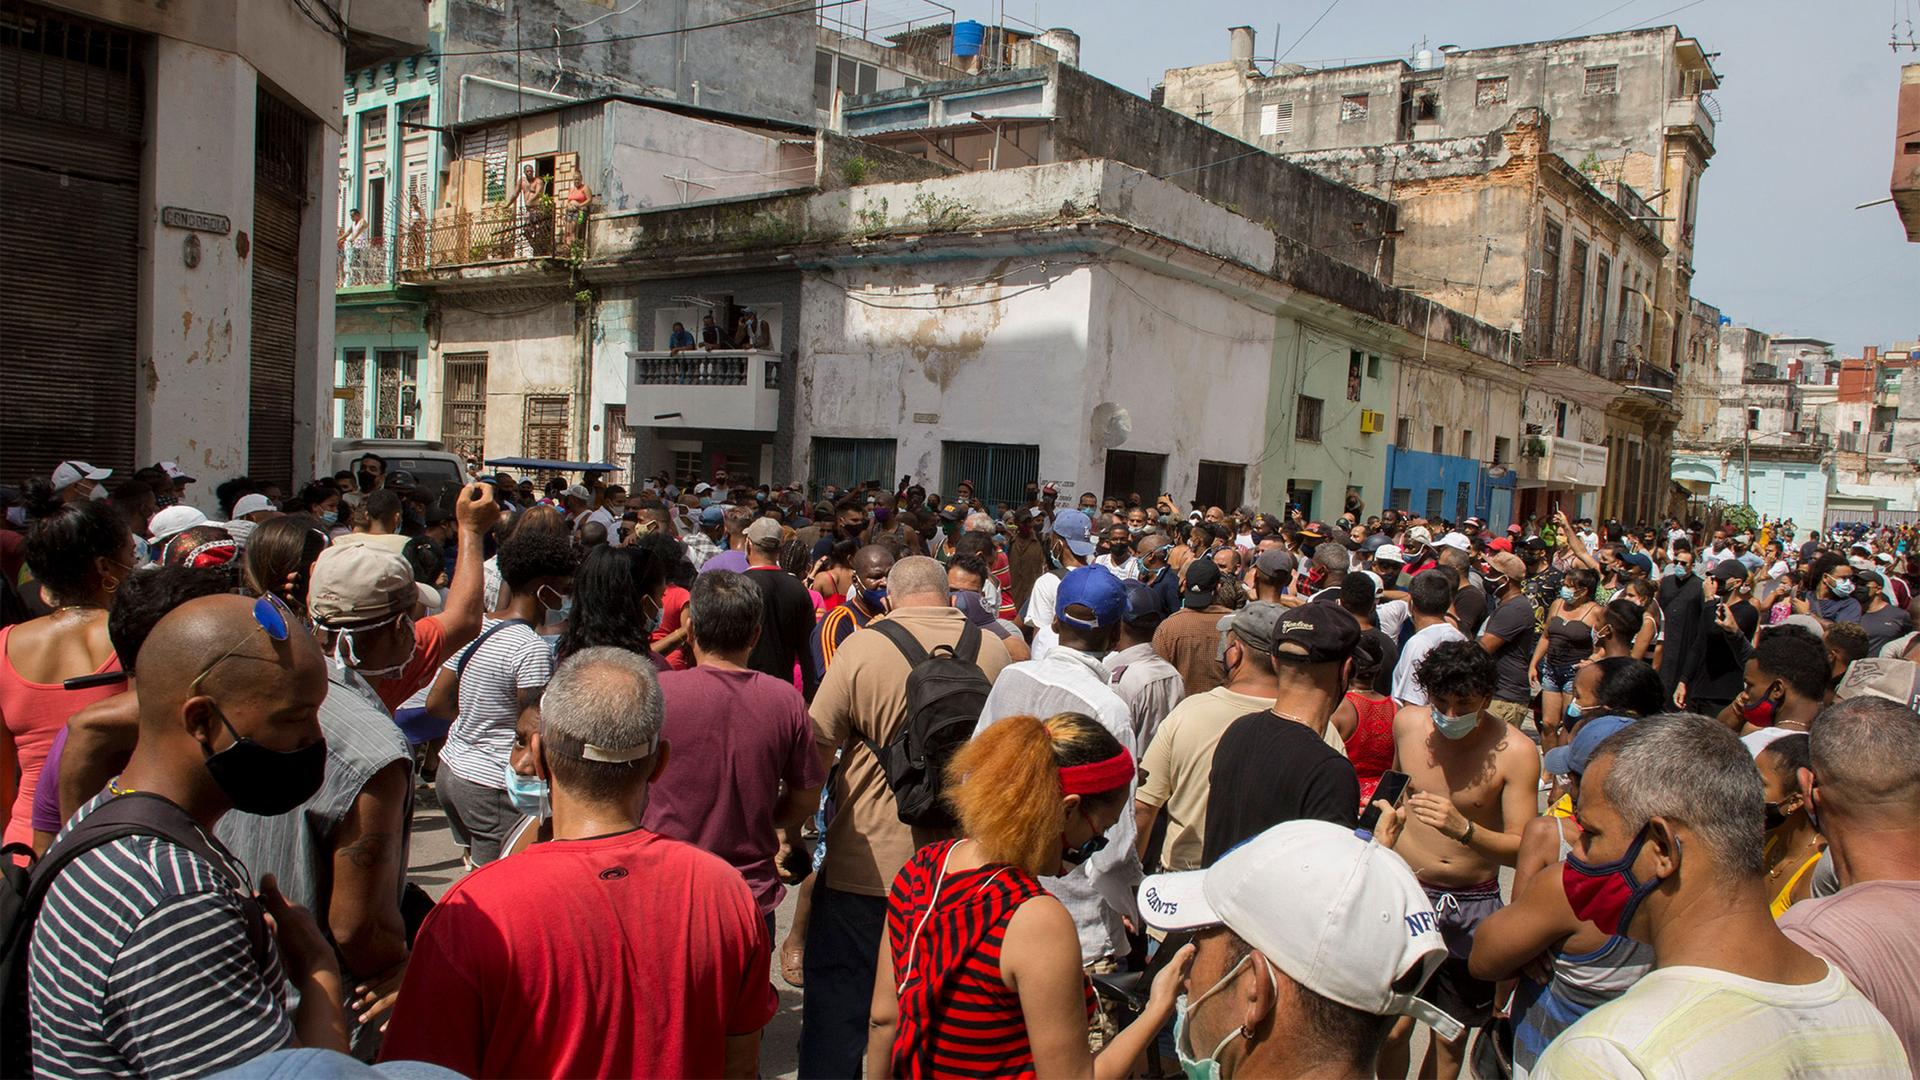 Anti-government protesters march in Havana, Cuba to protest against ongoing food shortages and high prices of foodstuffs